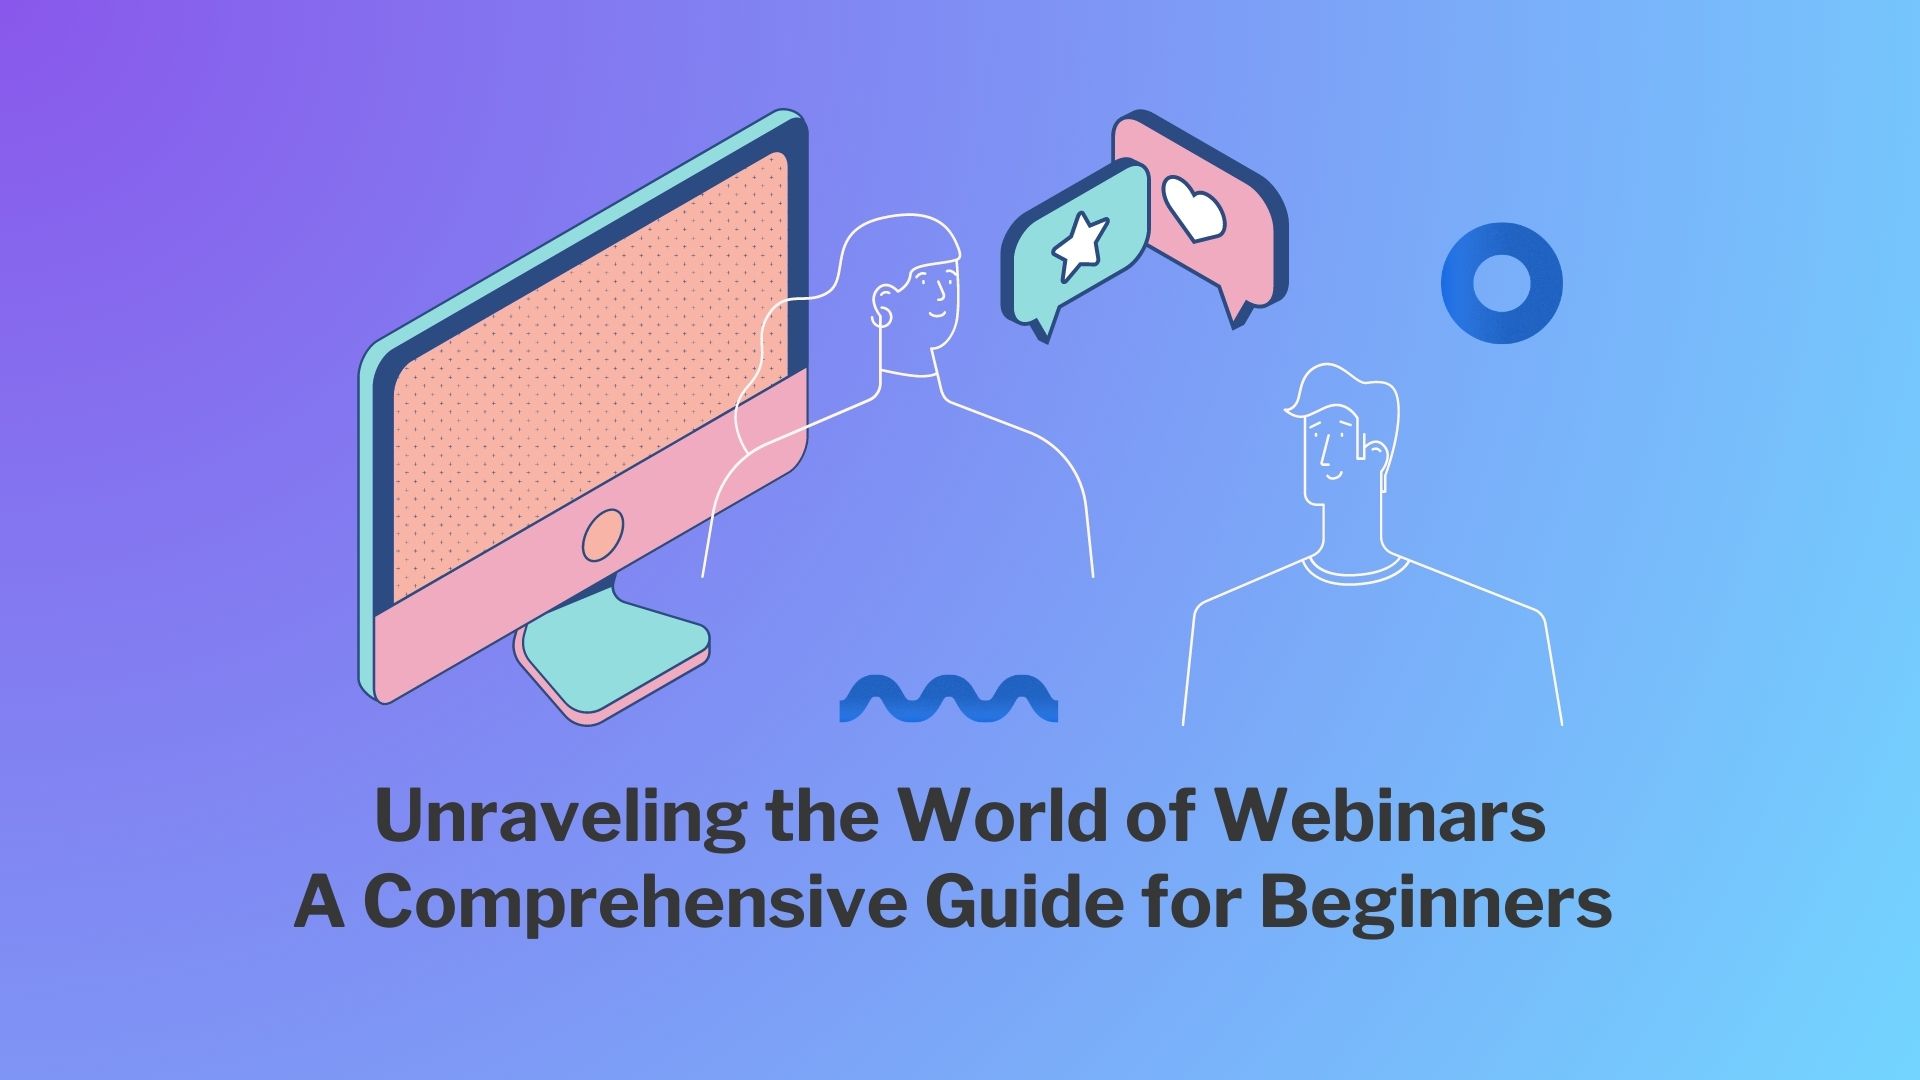 Unraveling the World of Webinars: A Comprehensive Guide for Beginners